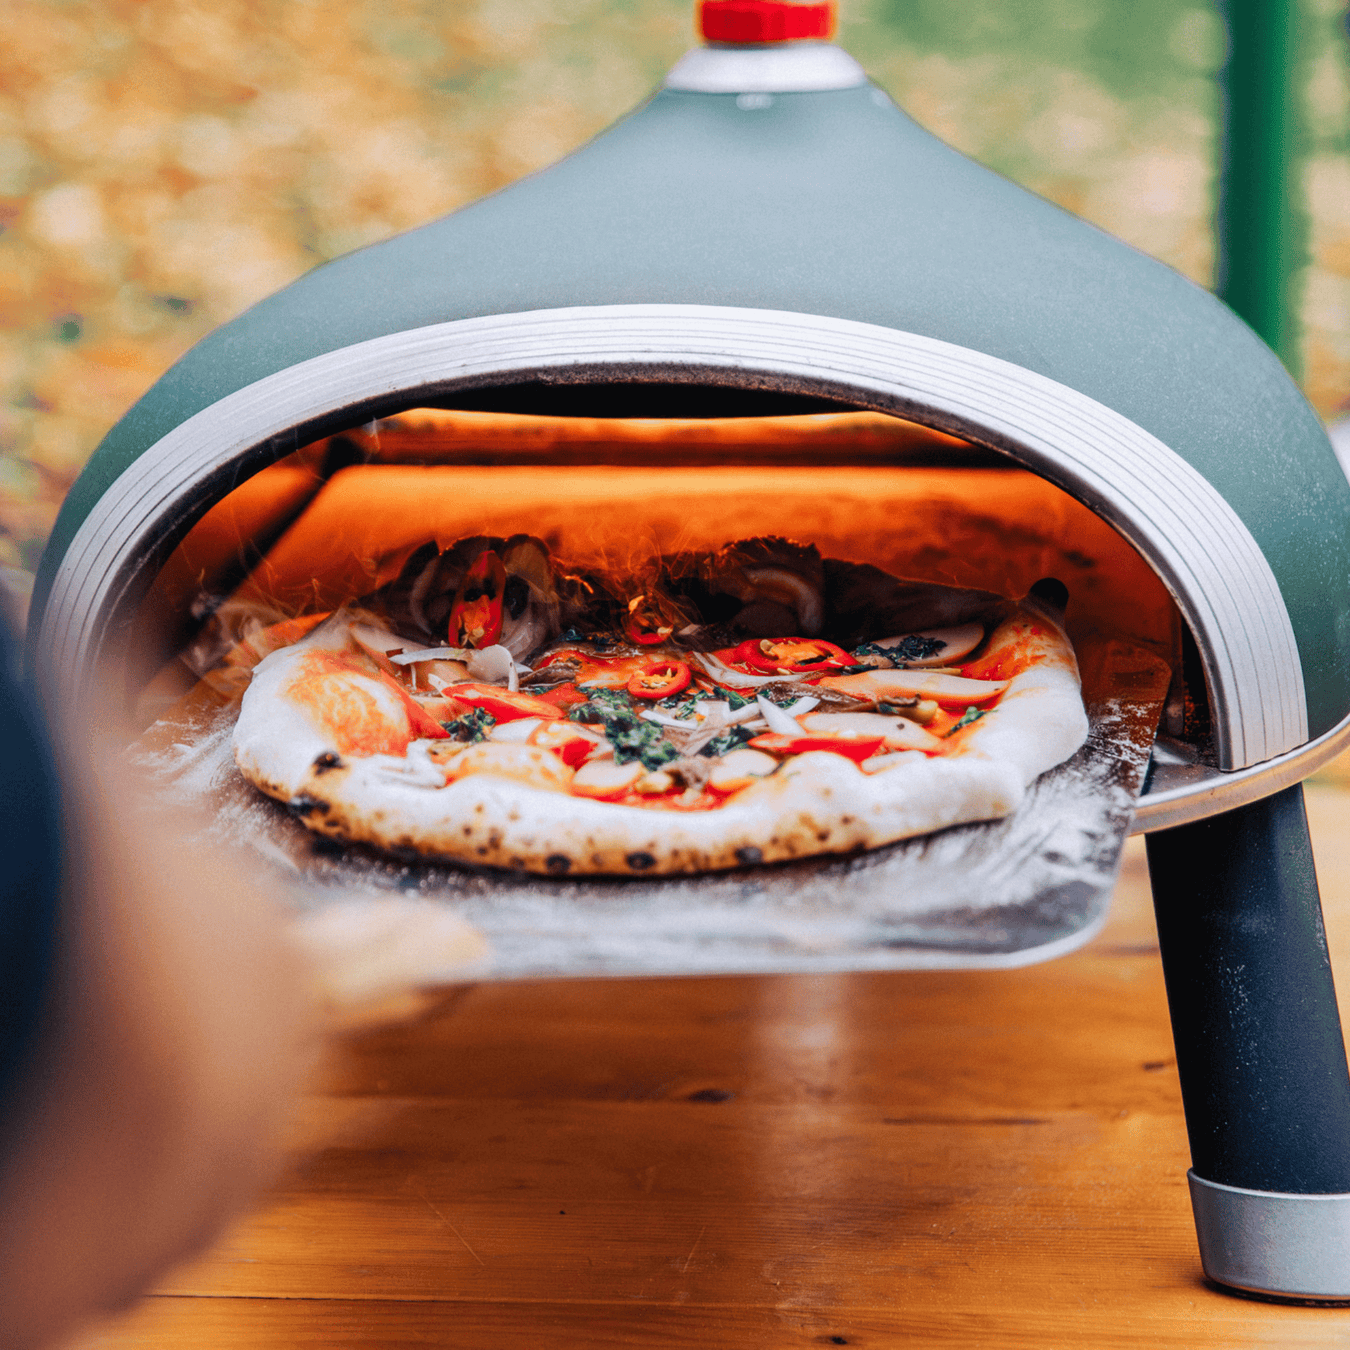 Delivita Wood Fired Pizza Ovens